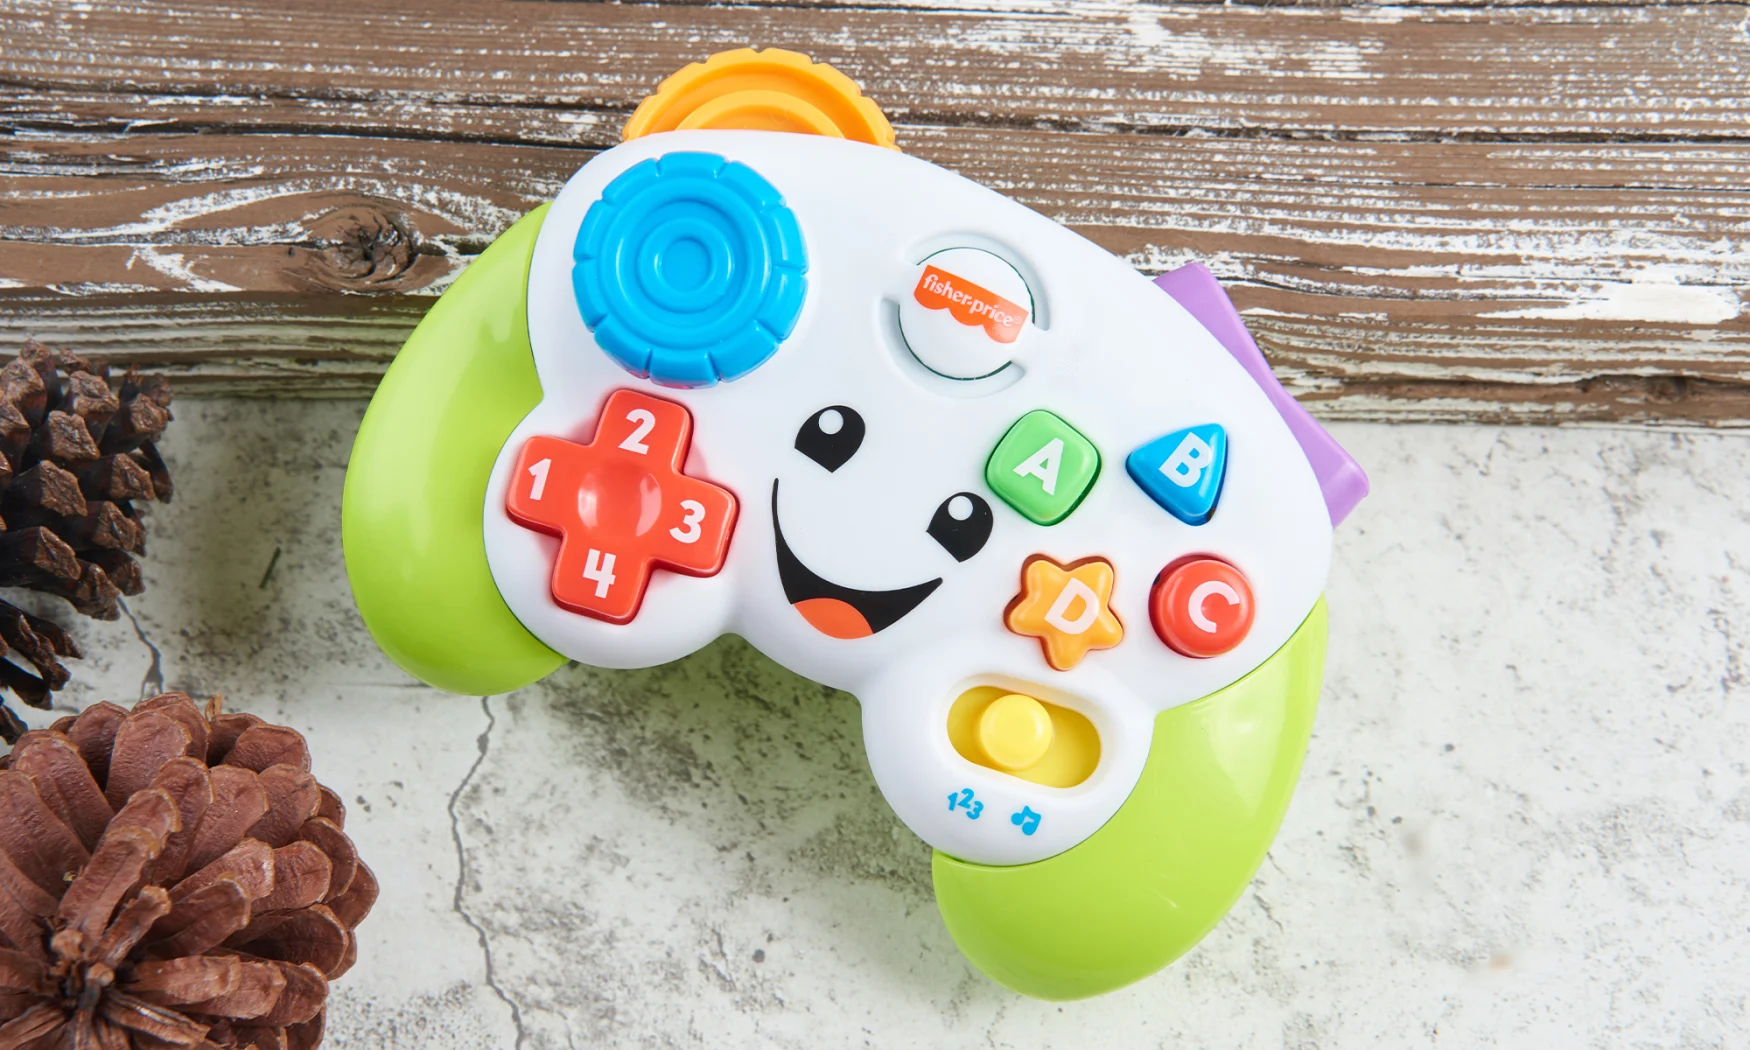 Fisher Price Laugh & Learn Game Controller